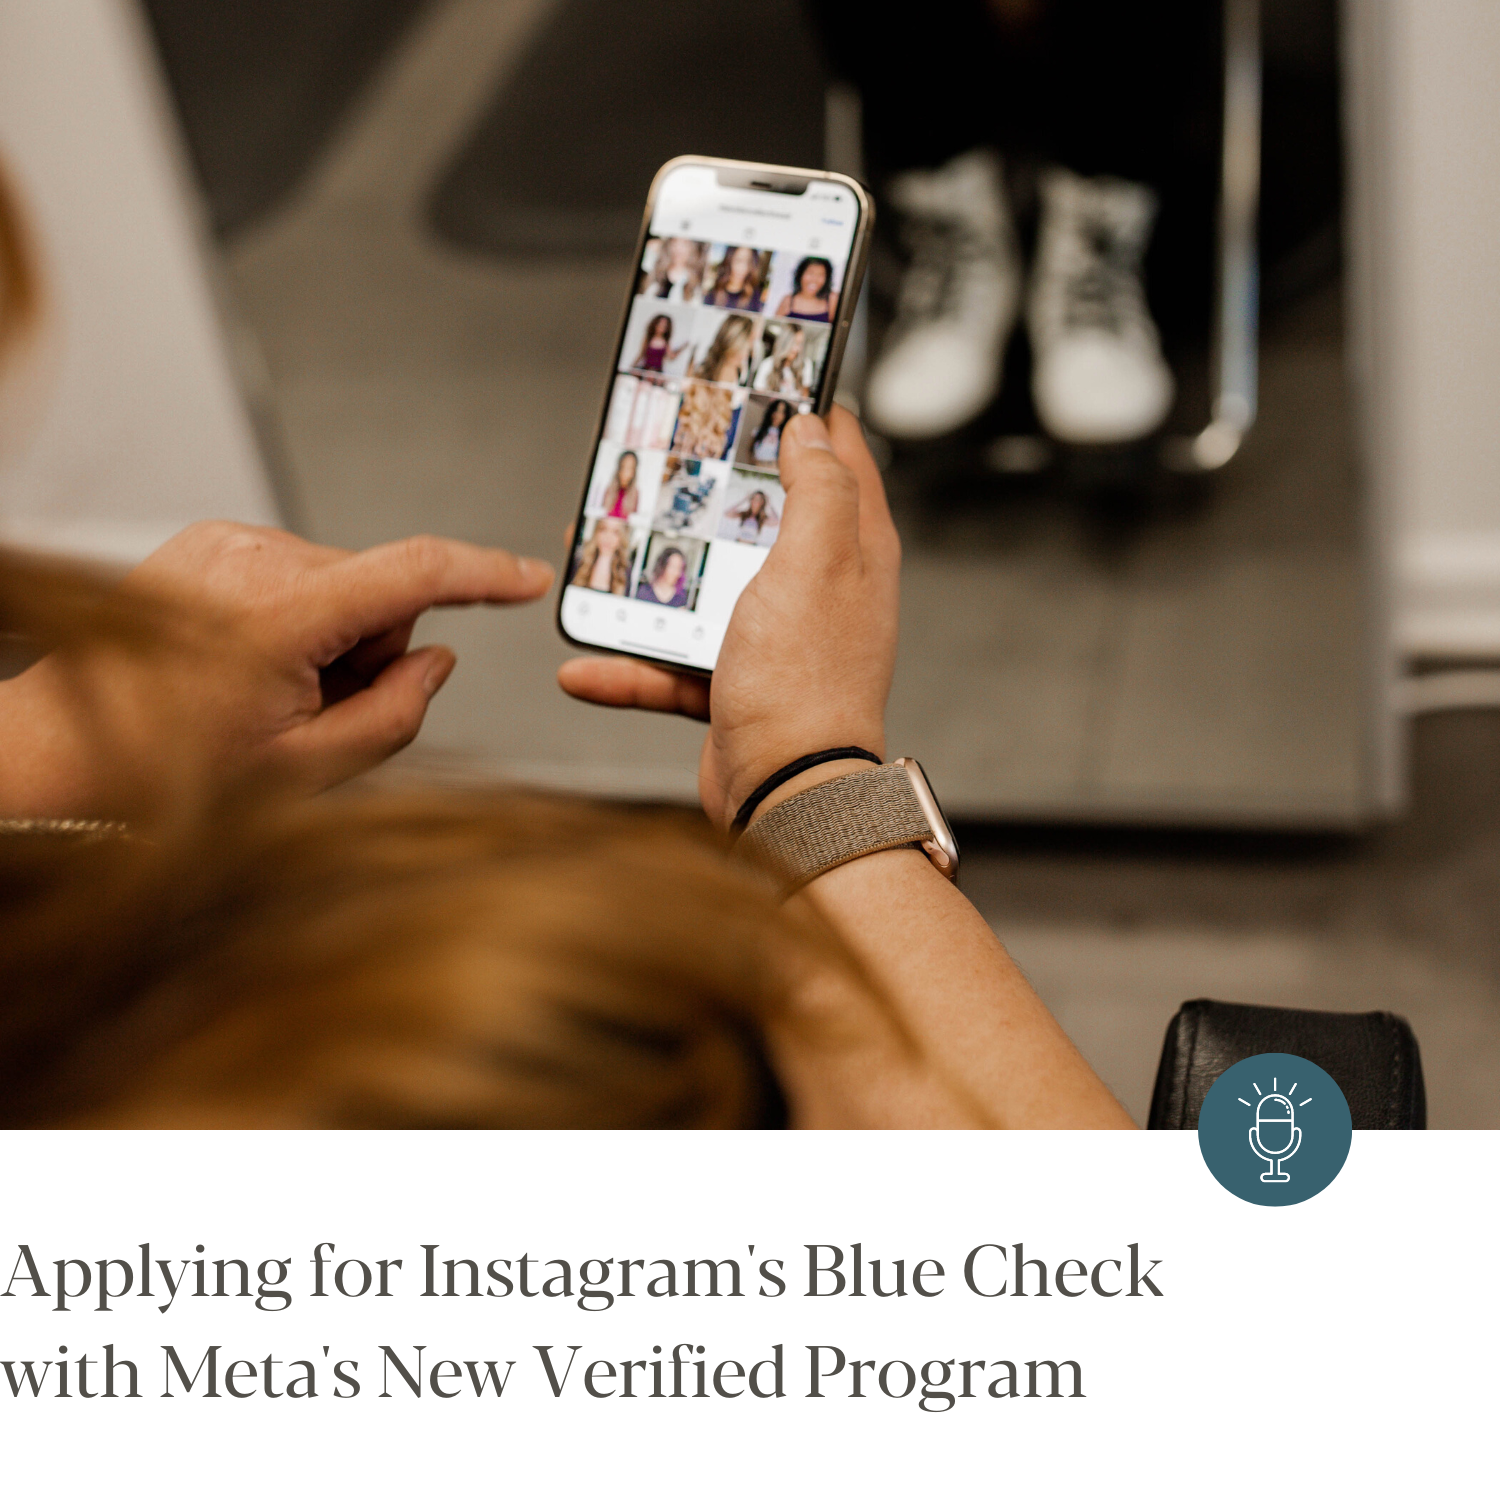 Episode #276 - Applying for Instagram's Blue Check with Meta's New Verified Program